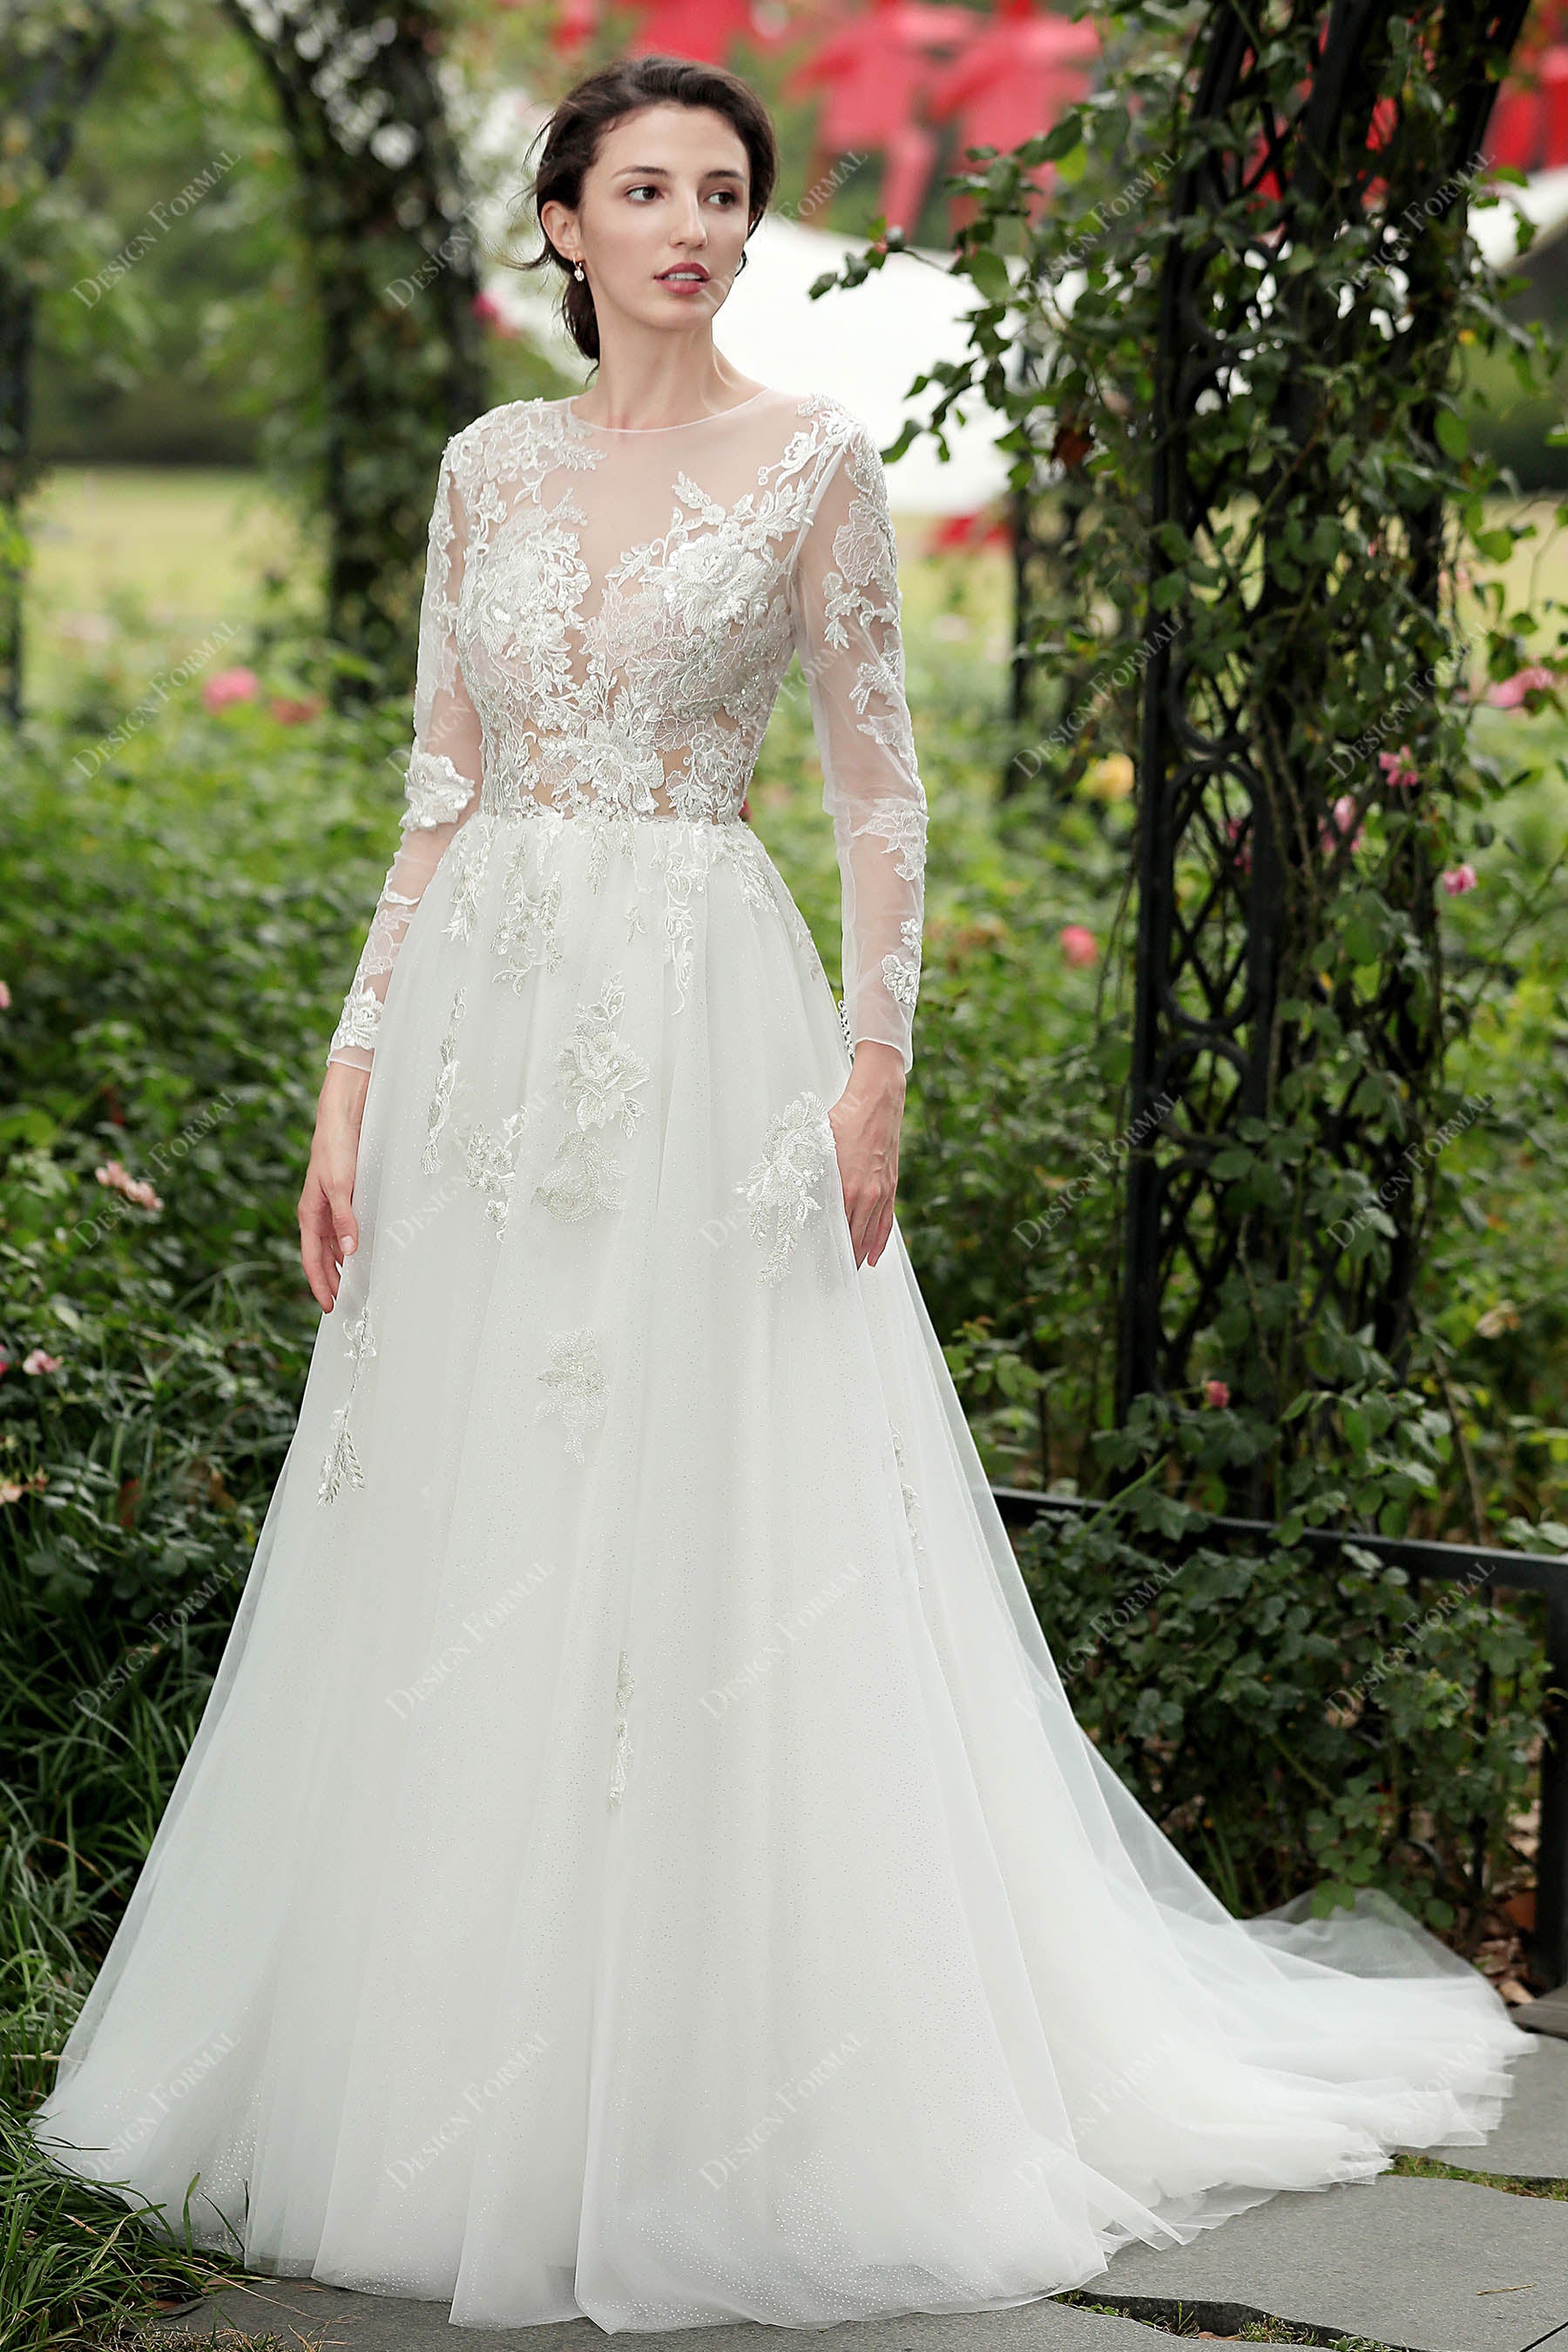 Ivory Beaded Lace Illusion Sleeved Bridal Gown